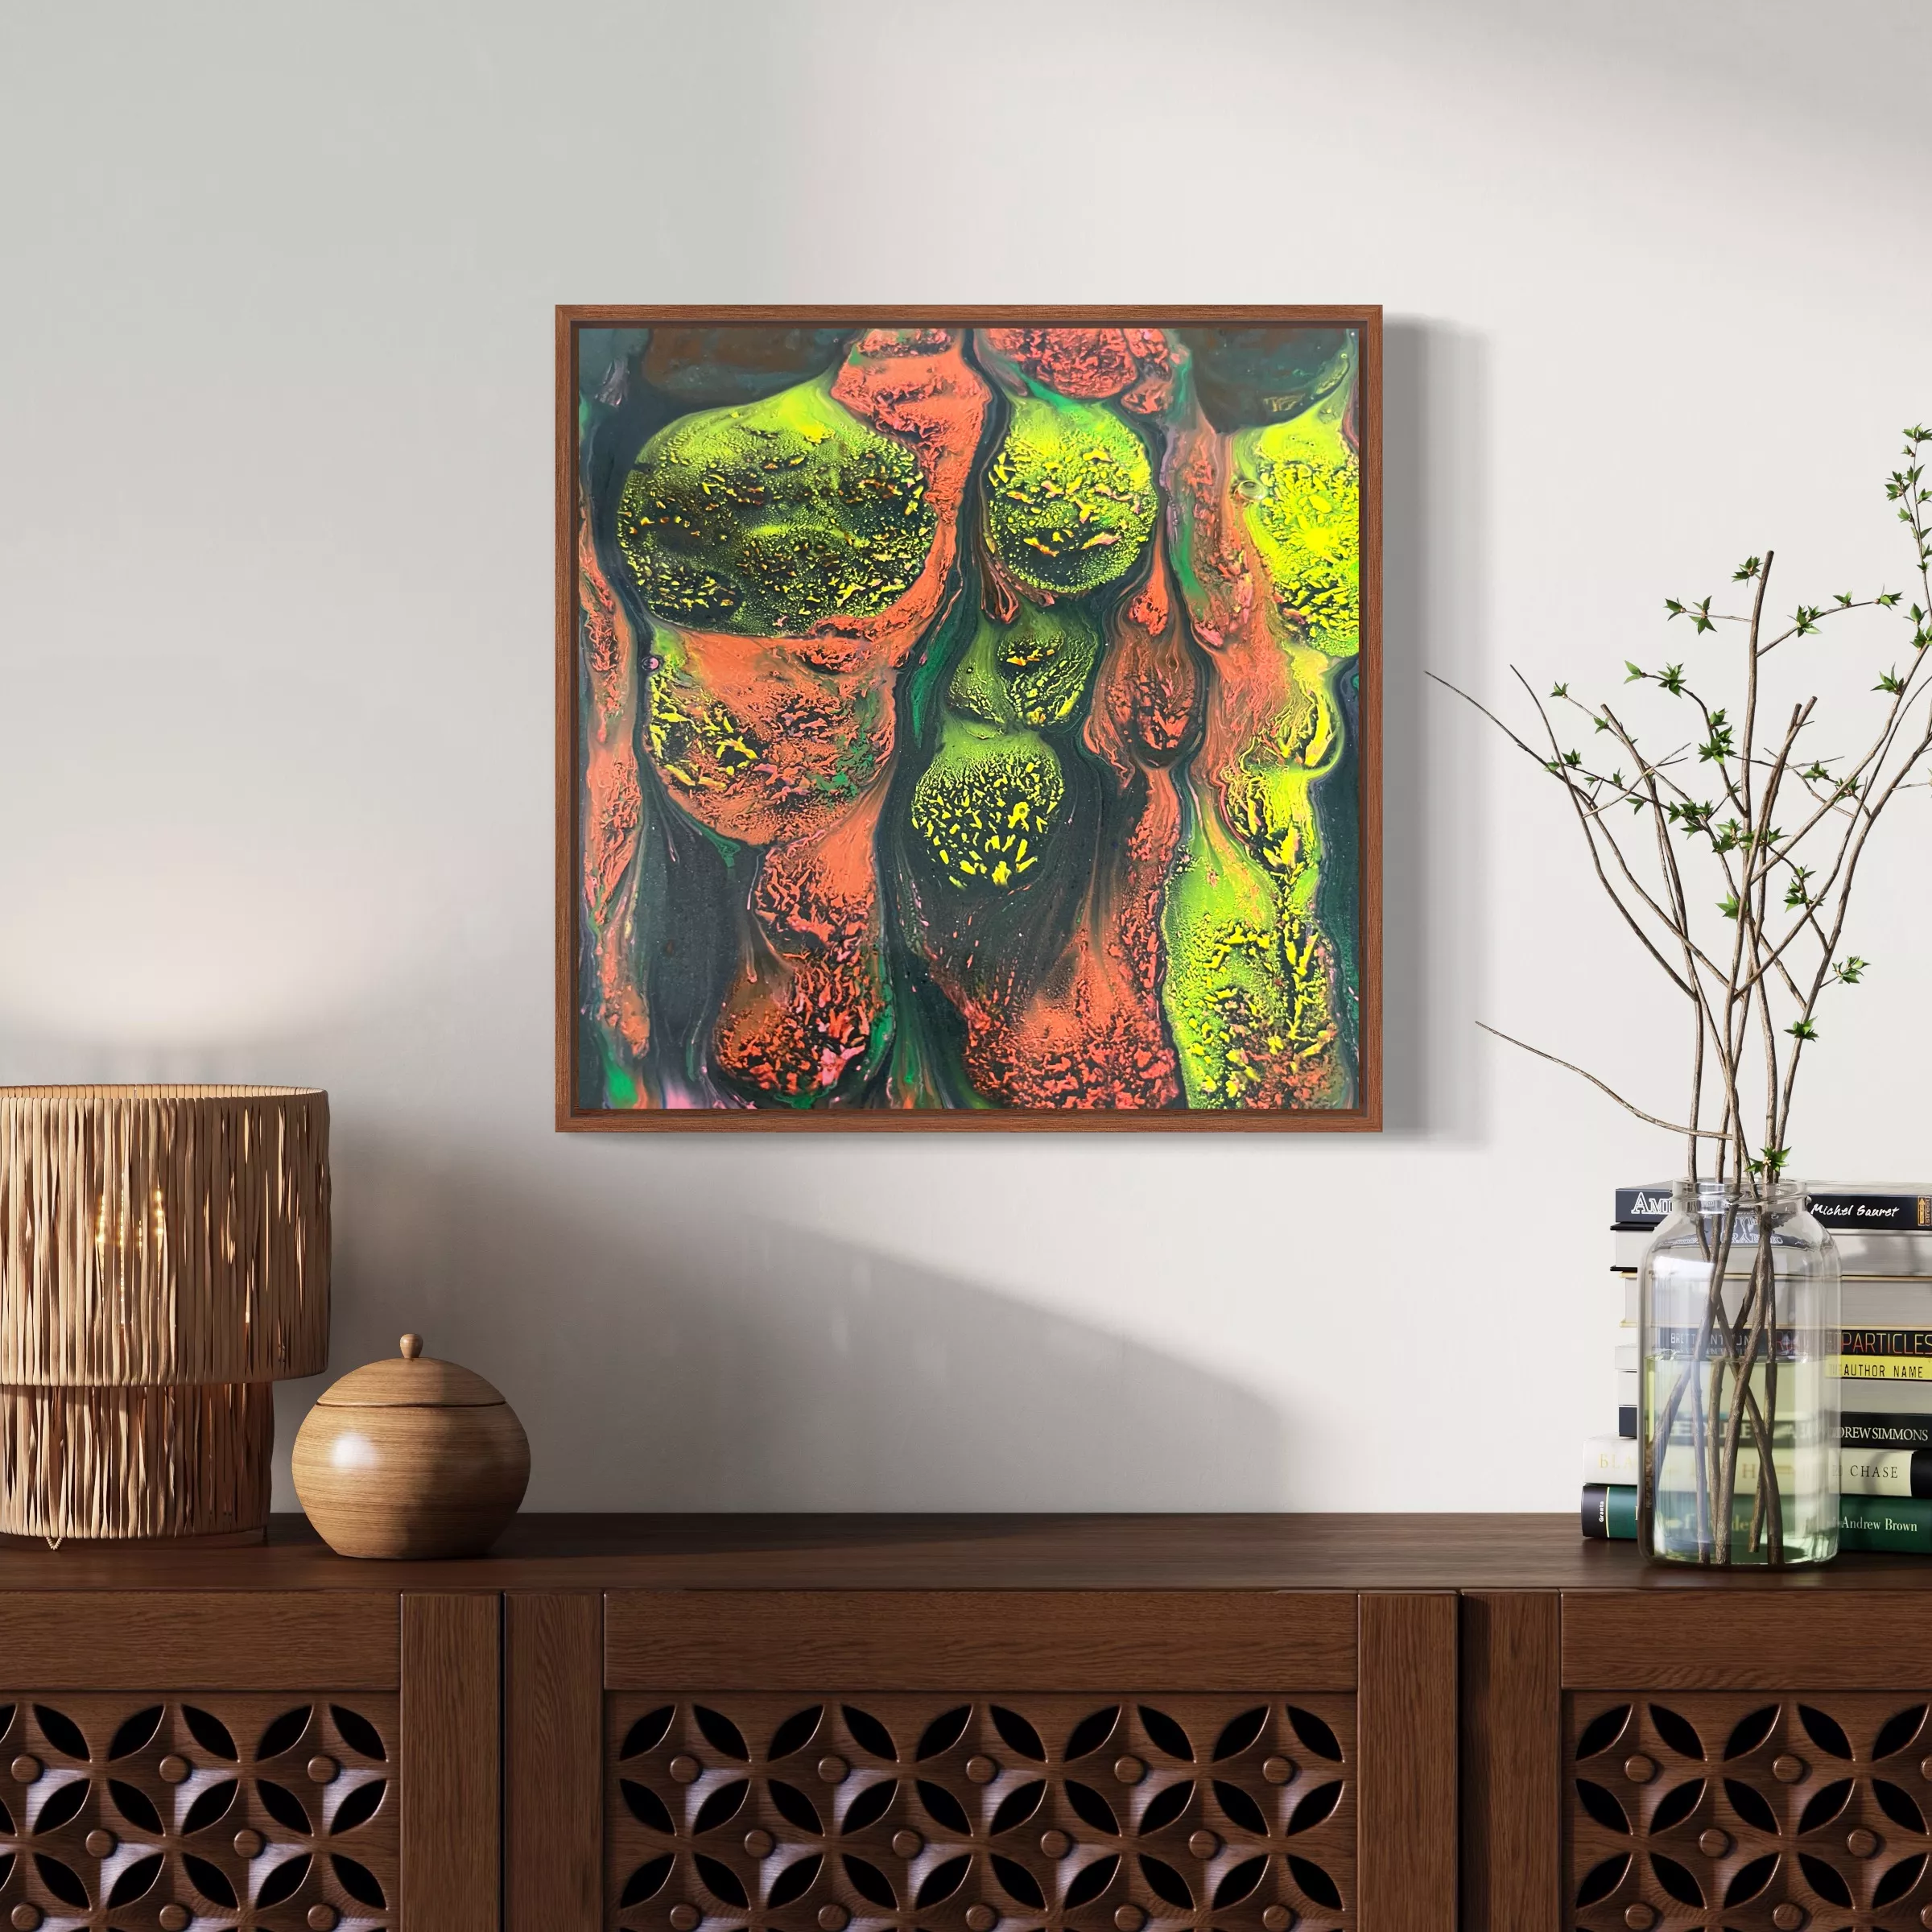 Lava Blooms on wall above wooden table with vases and flower vase. by Simone woods abstract artist.